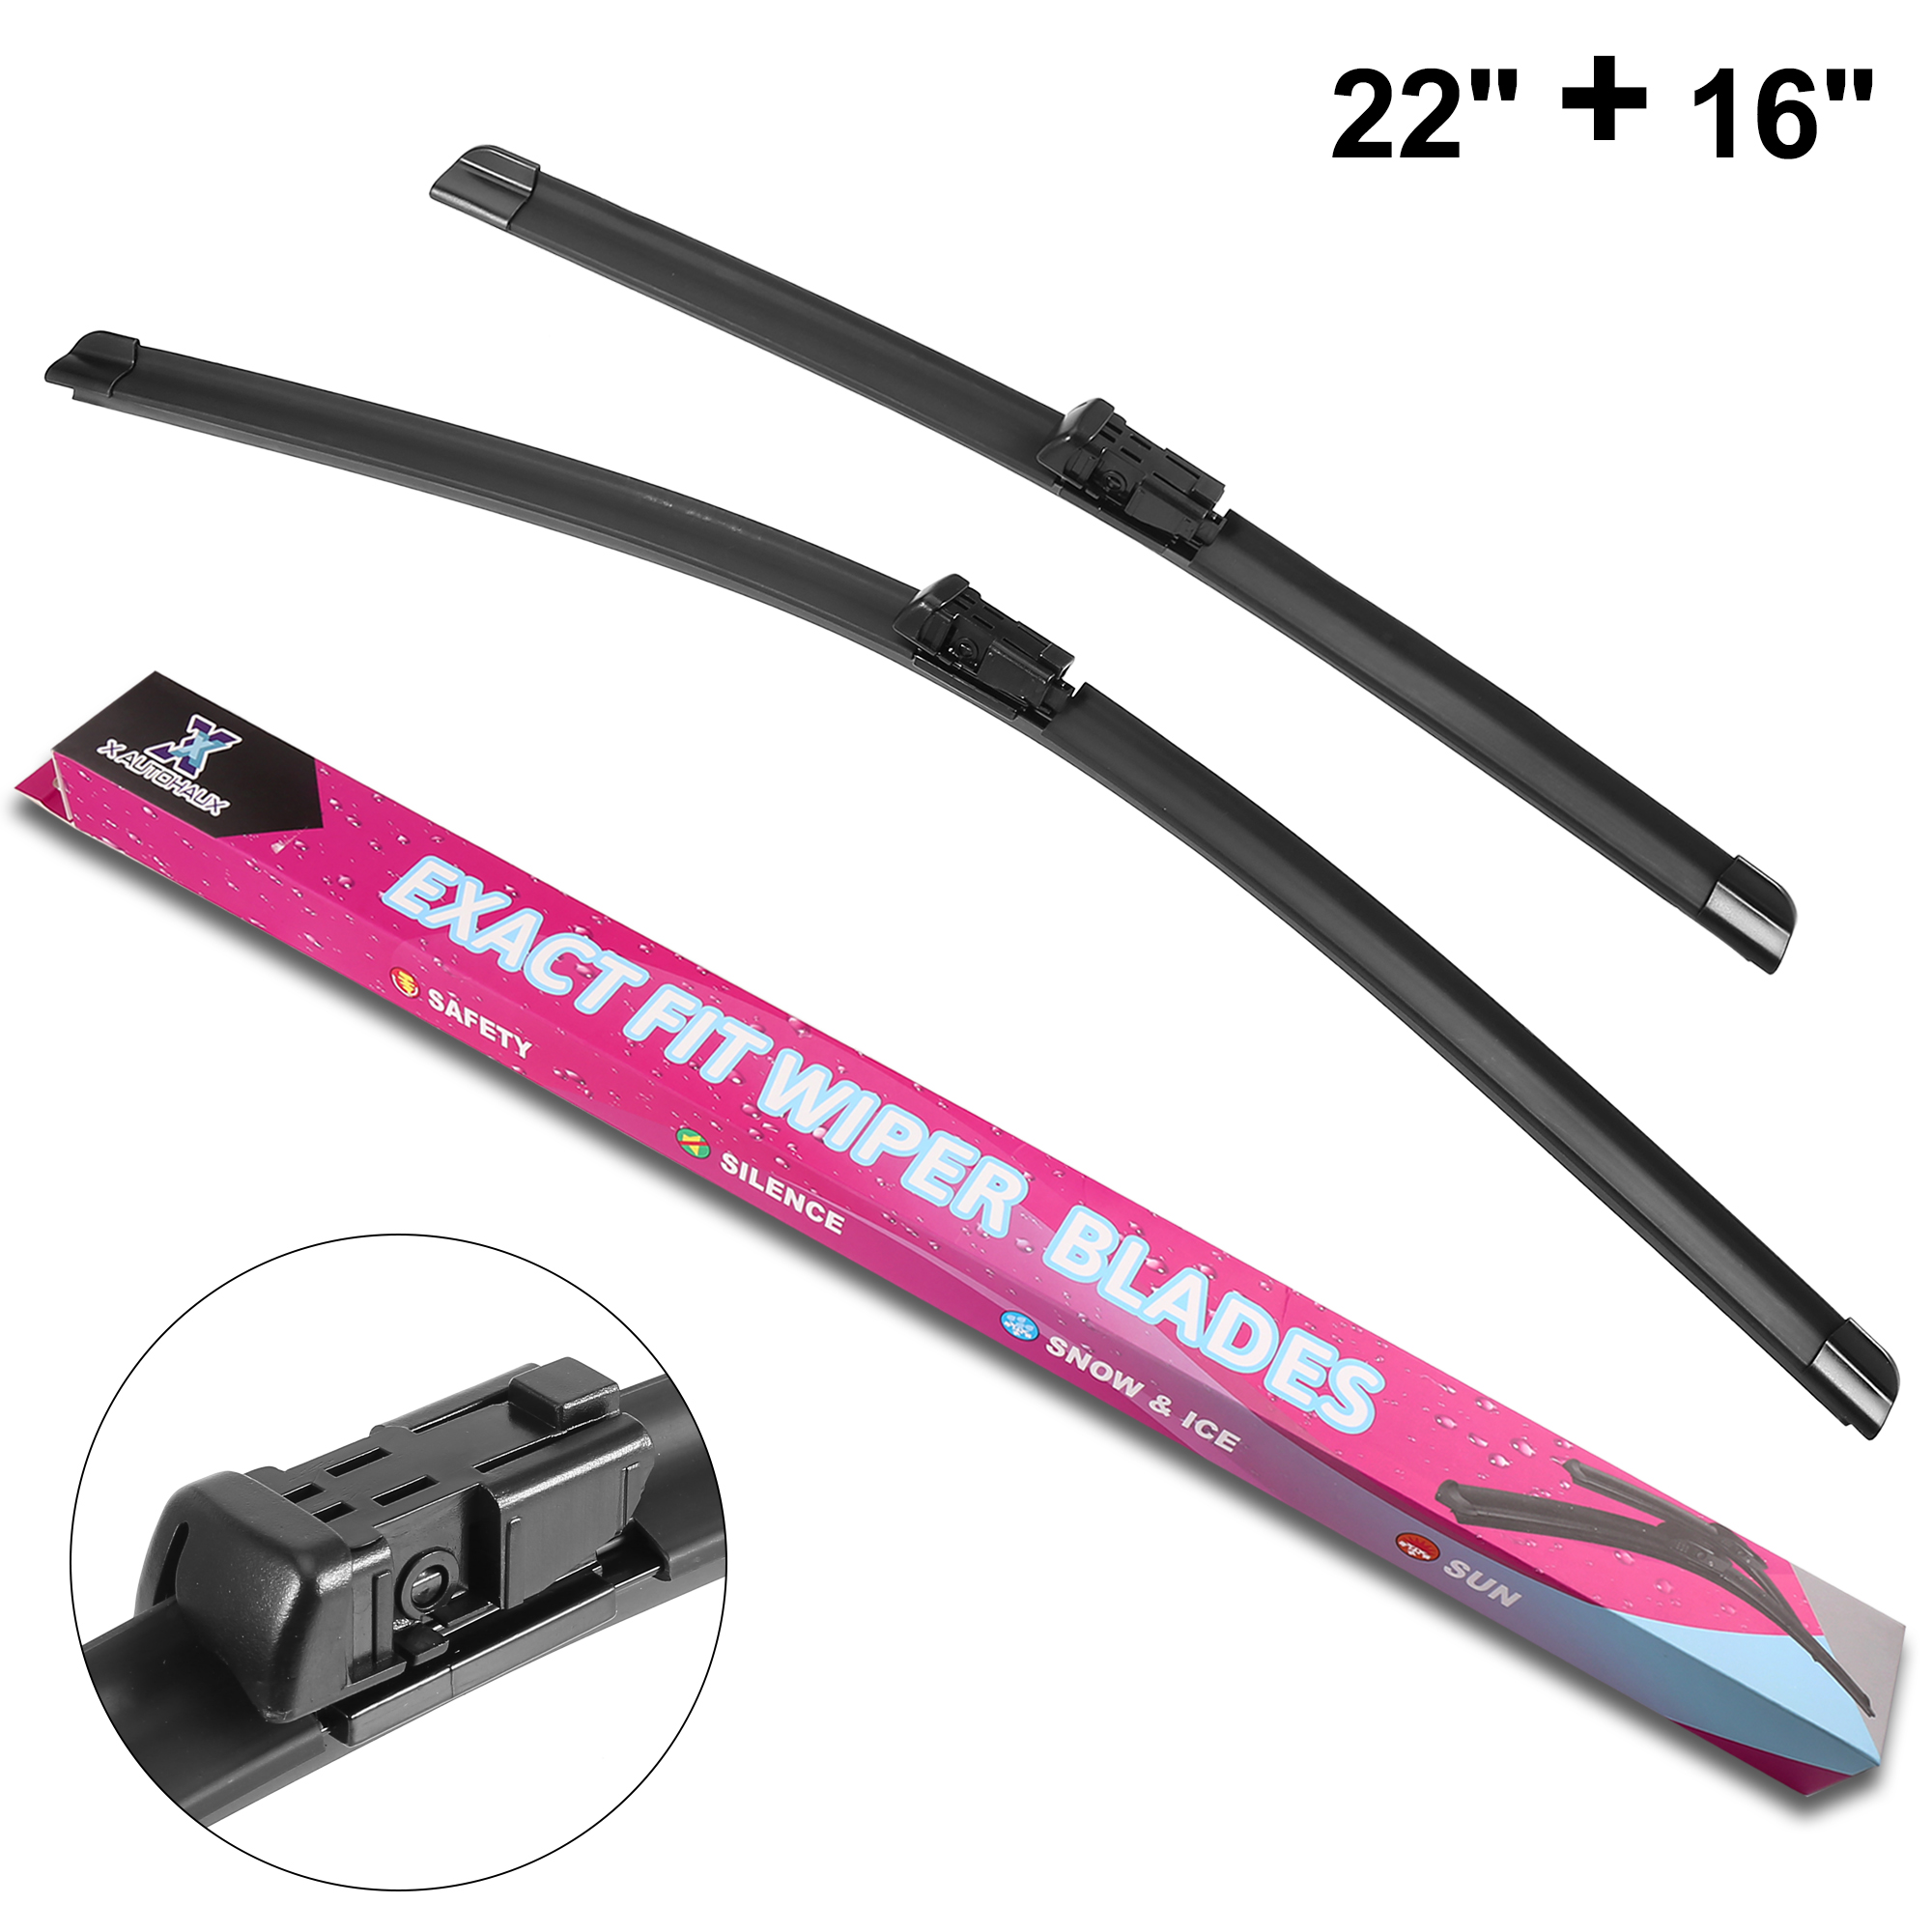 Unique Bargains Pair Front Windshield Wiper Blades for Ford EcoSport 2018 2019 22 Inch + 16 Inch